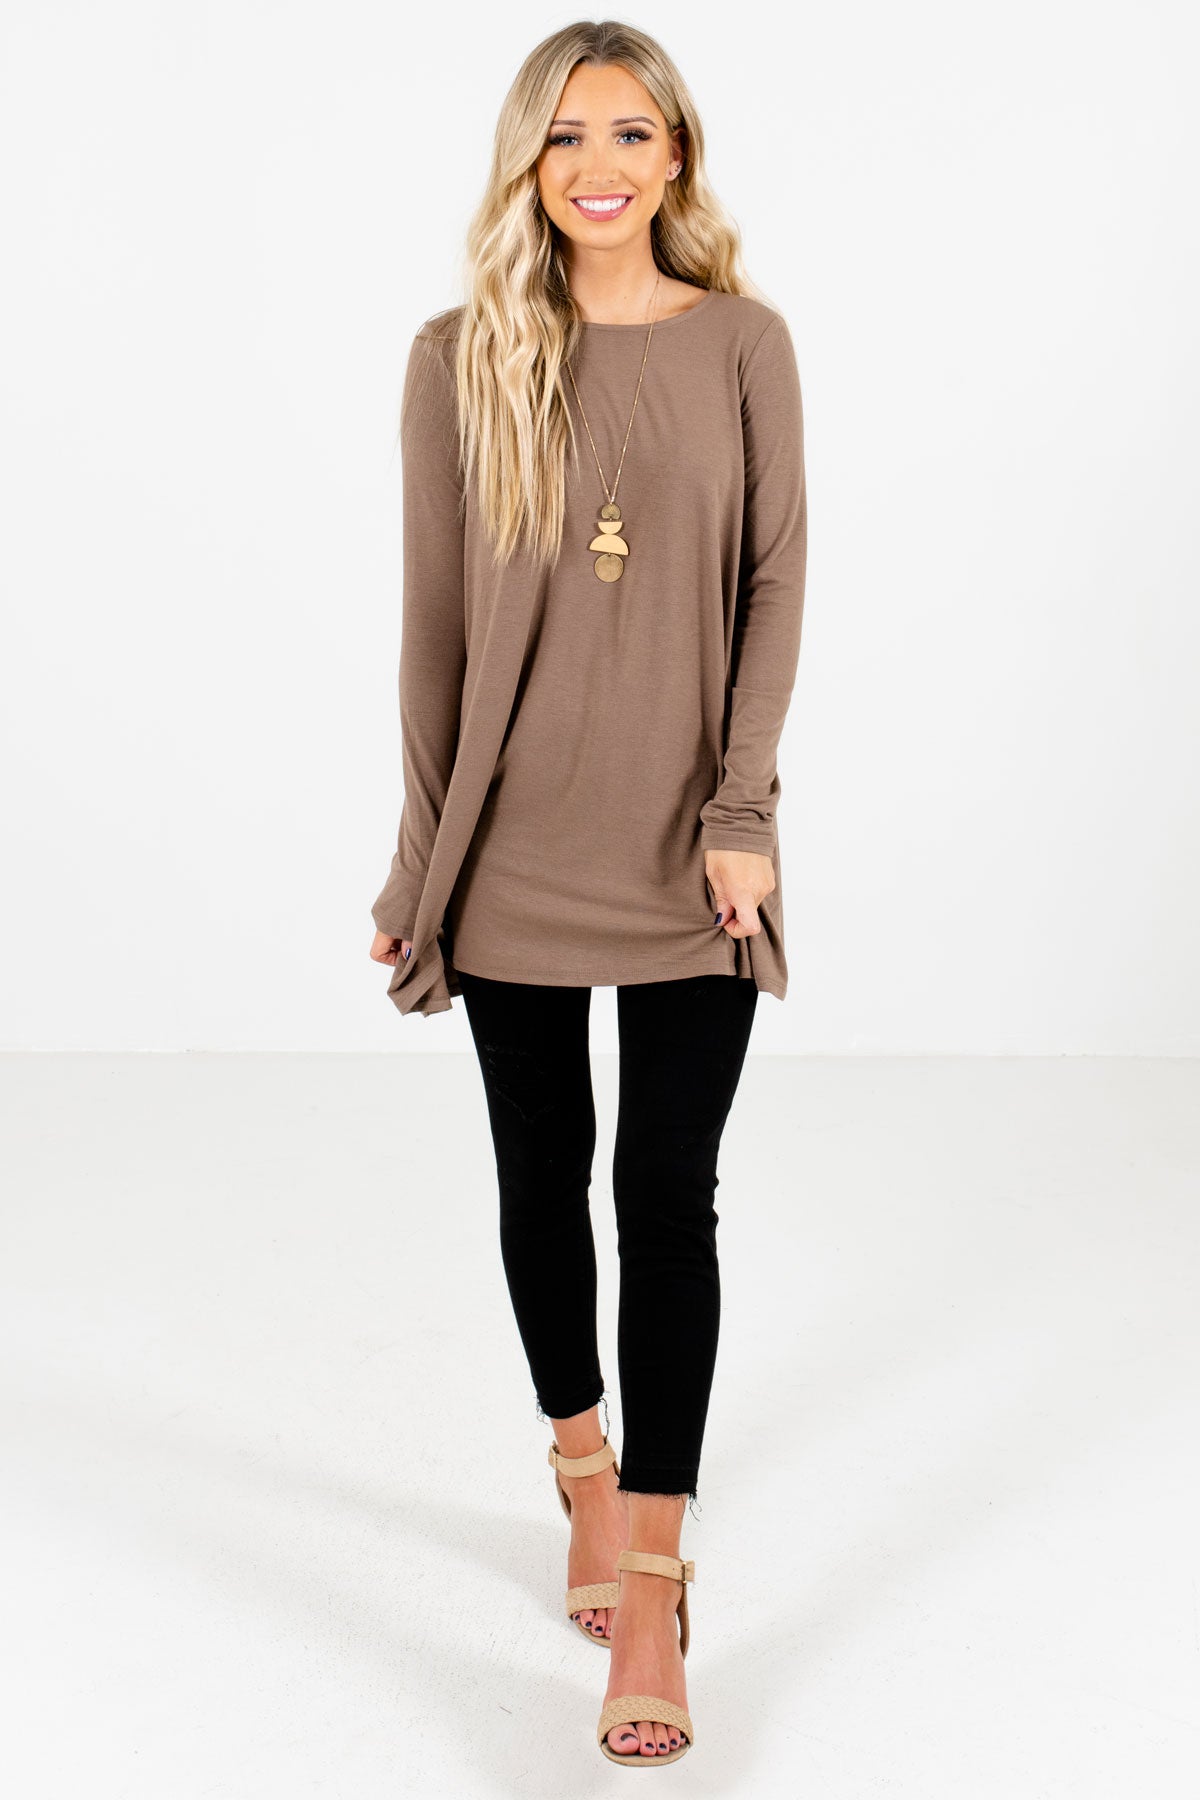 Brown Cute and Comfortable Boutique Tops for Women